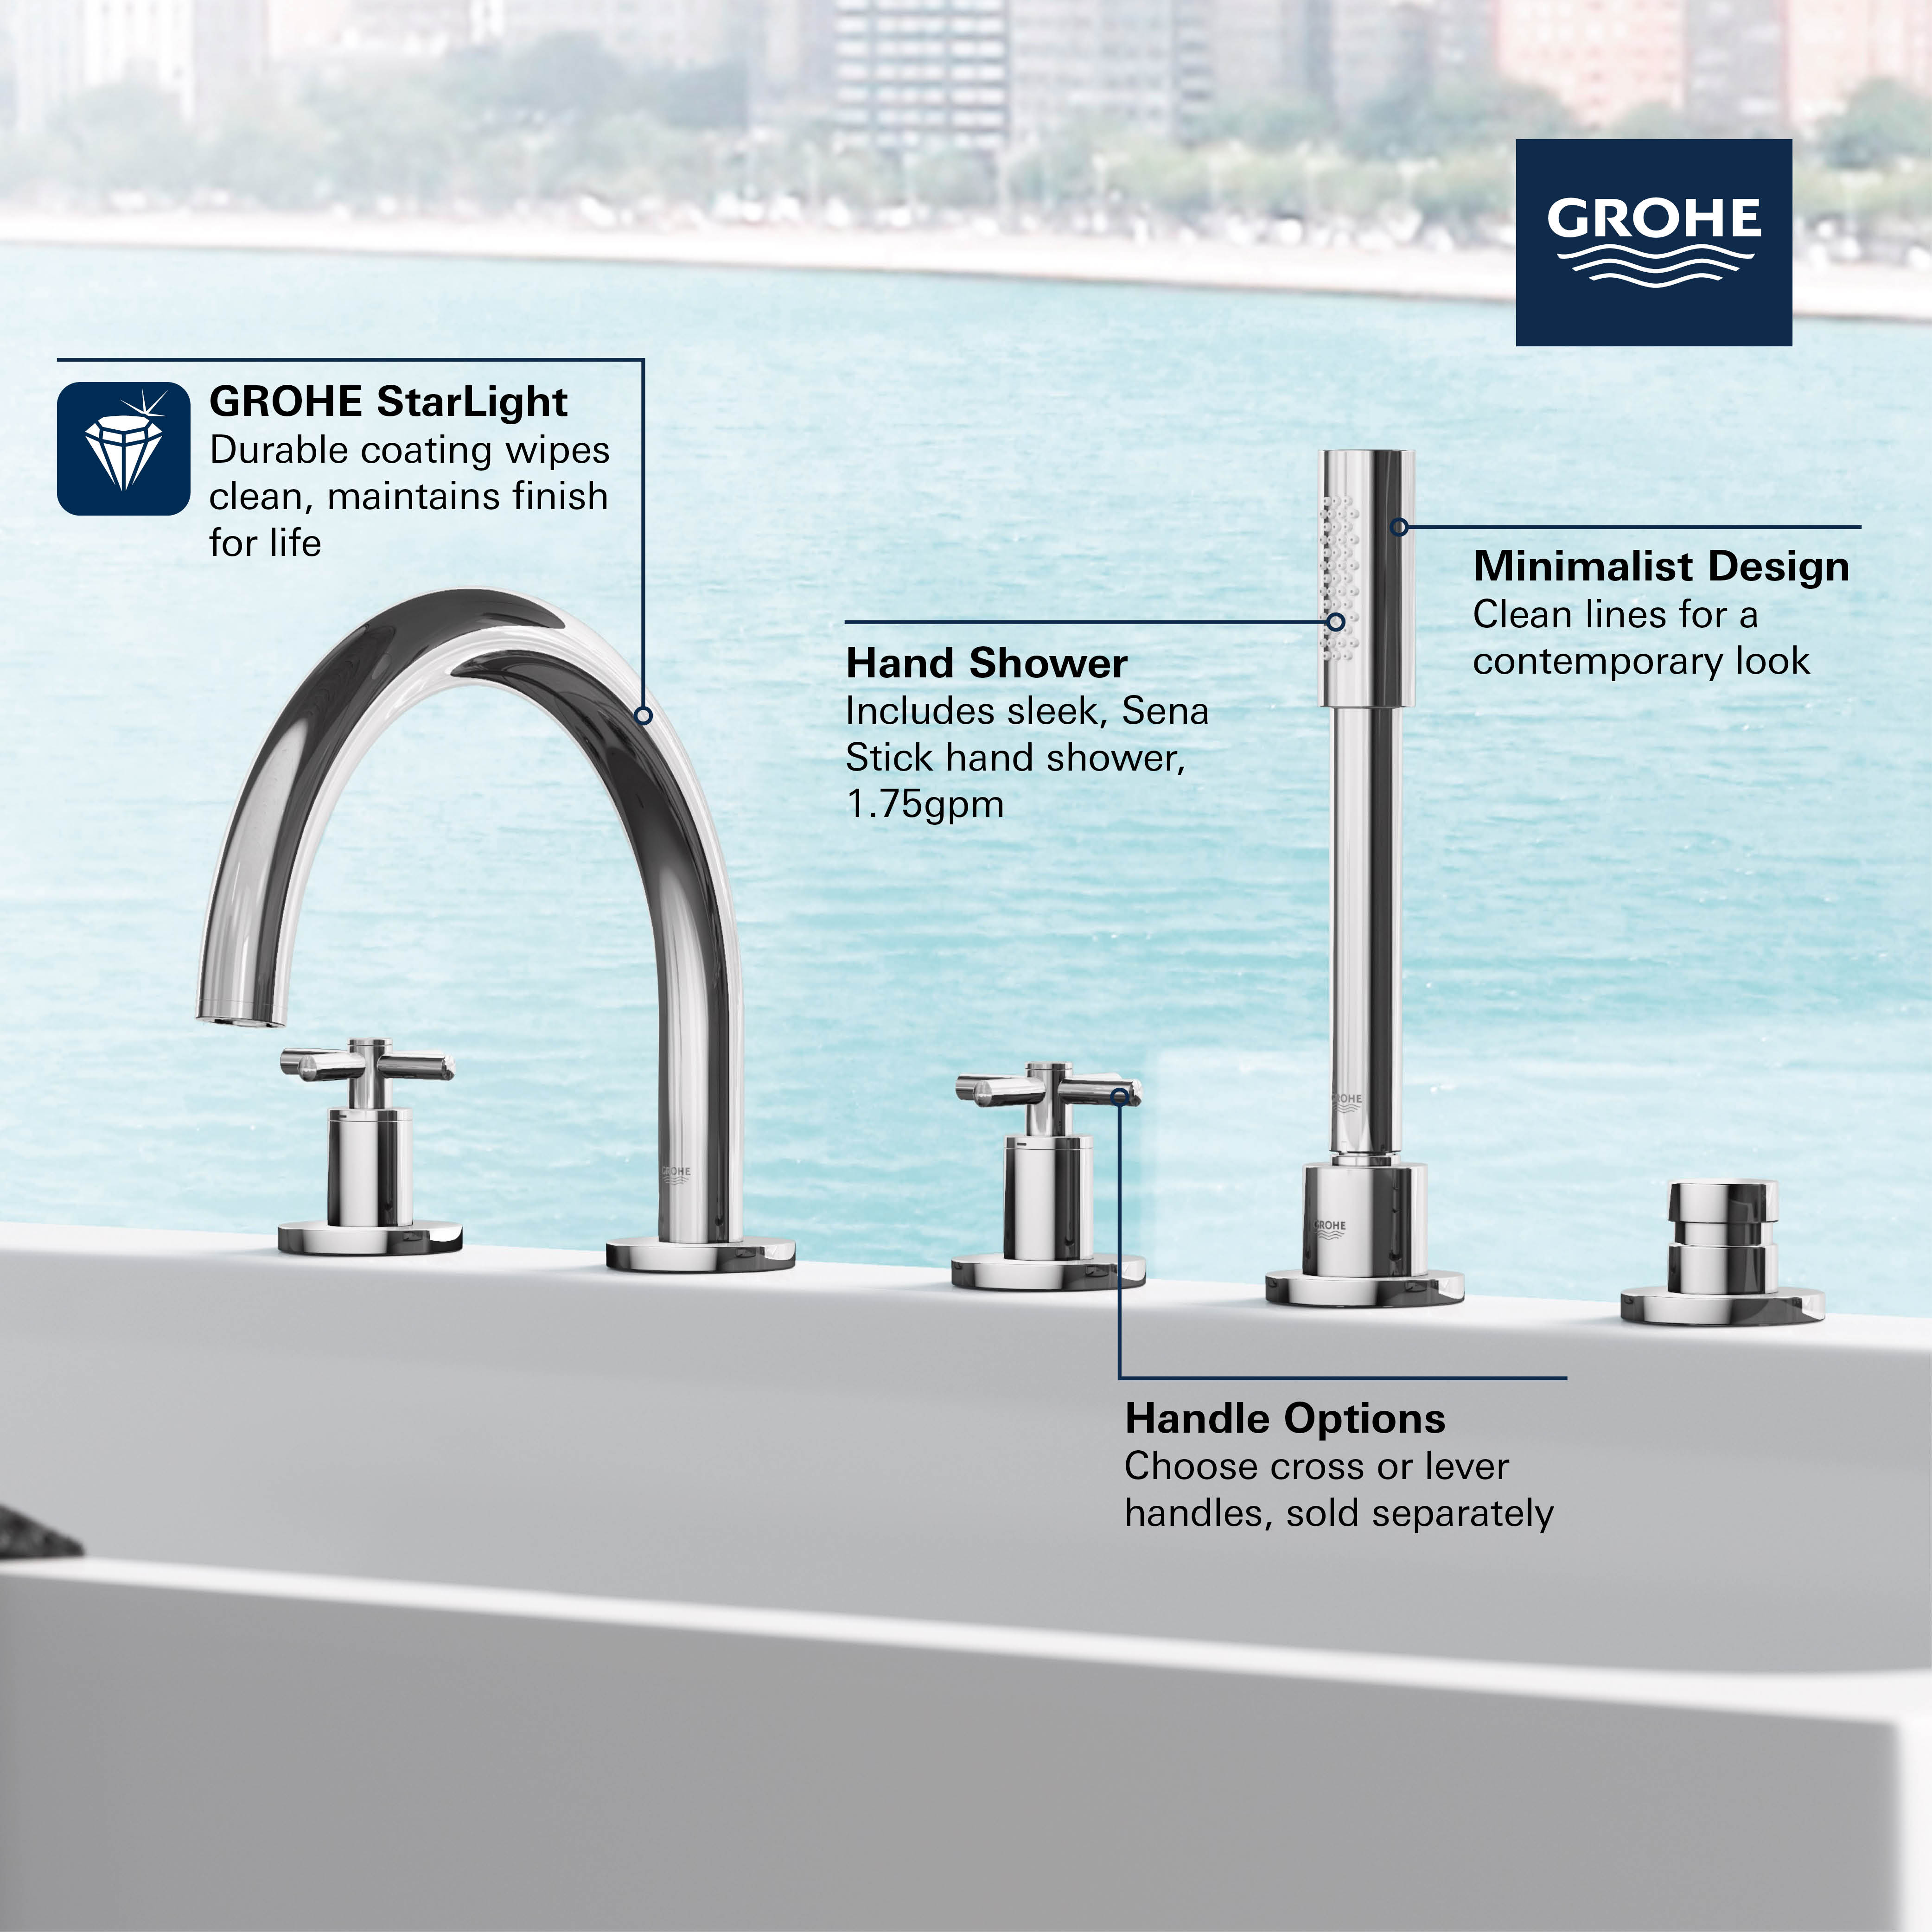 5-Hole 2-Handle Deck Mount Roman Tub Faucet with 6.6 L/min (1.75 gpm) Hand Shower